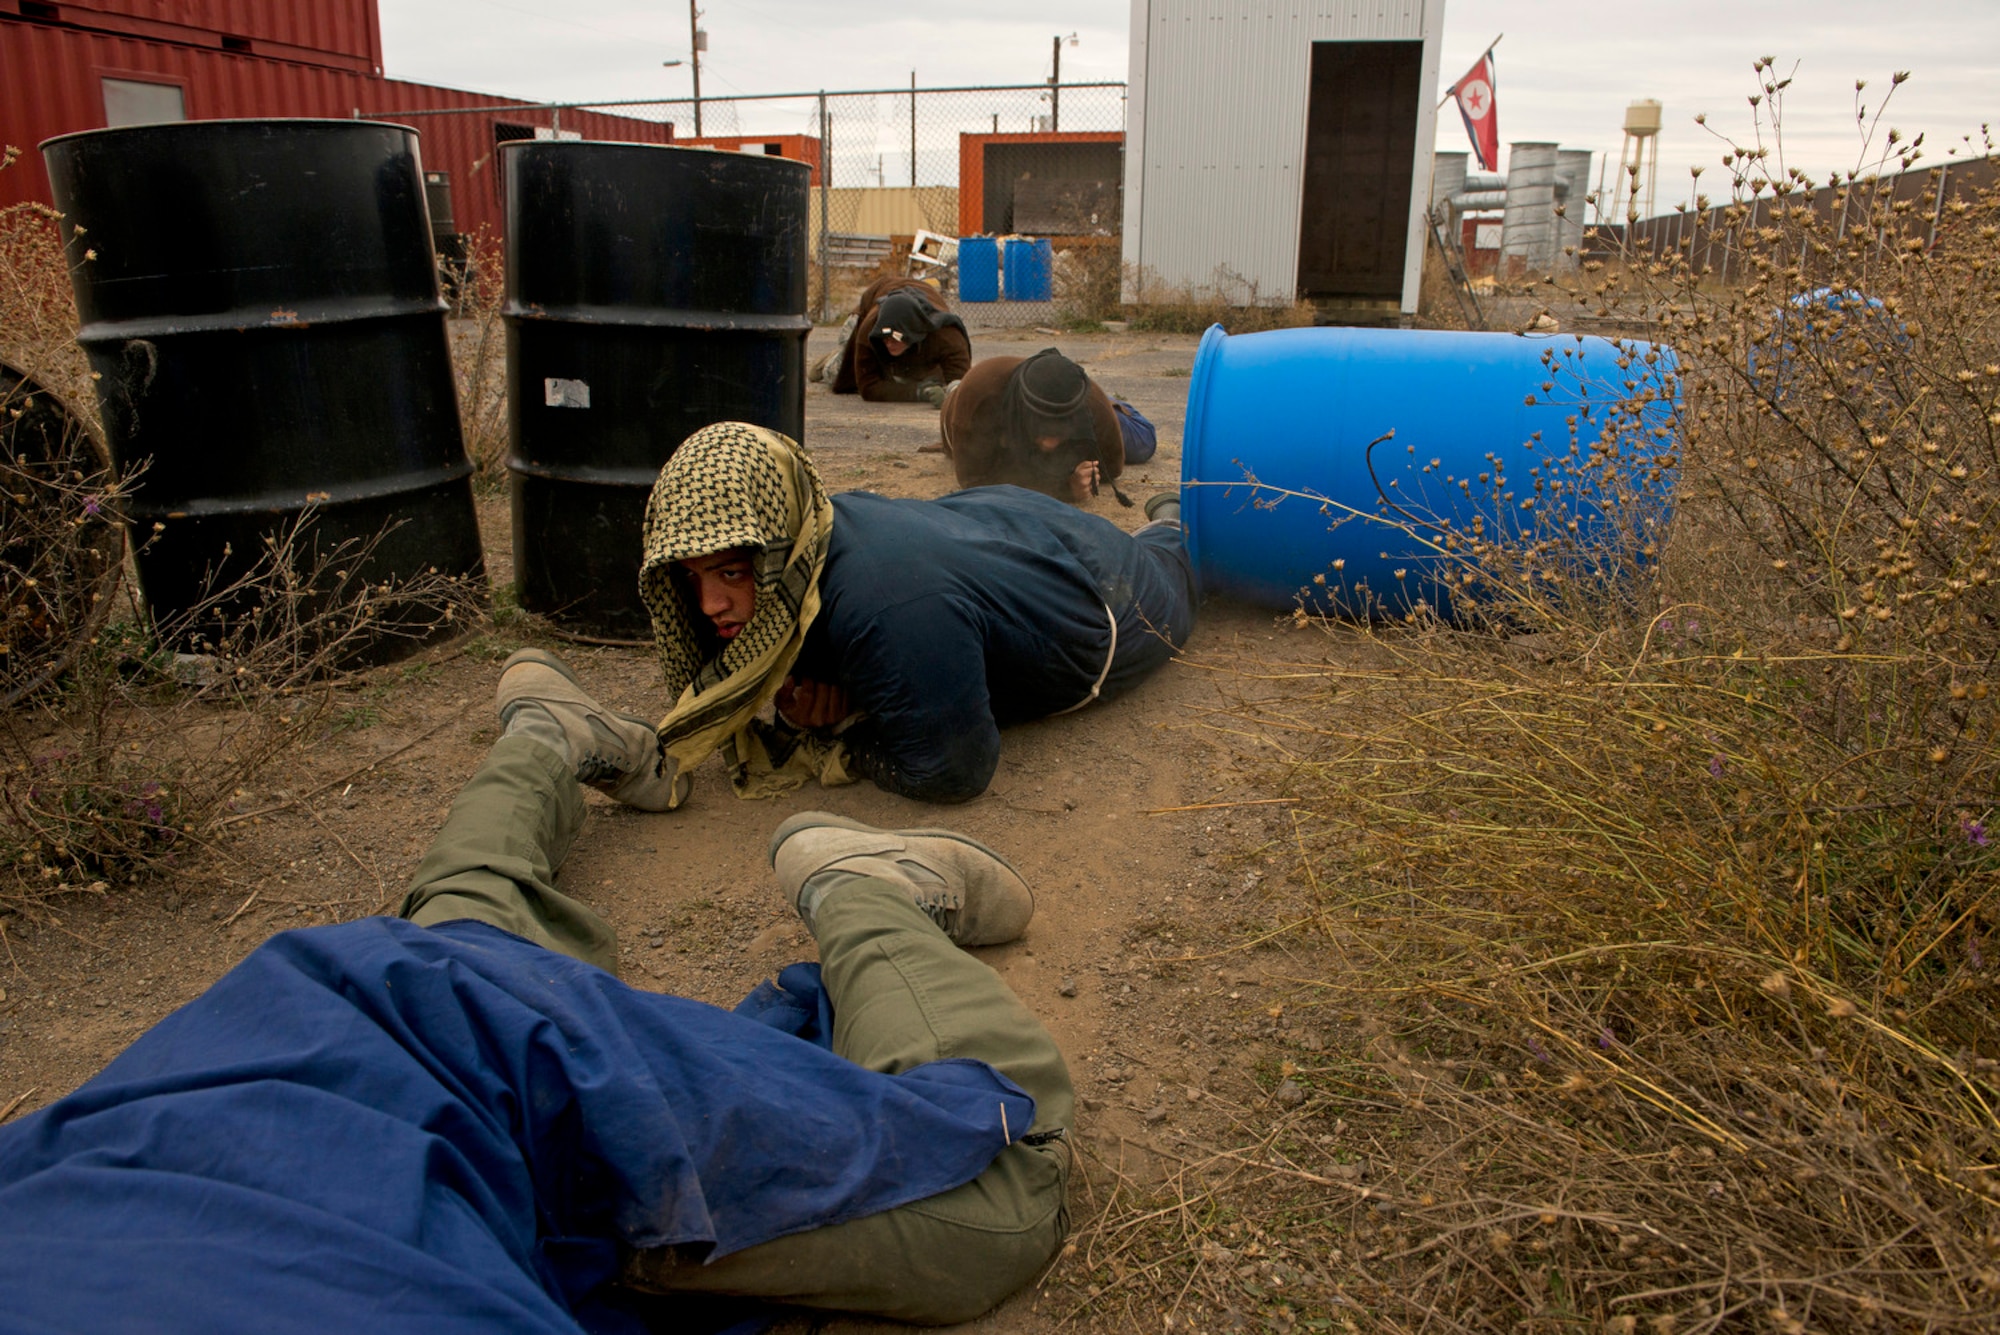 U.S. Air Force survival, evasion, resistance and escape students low crawl through a simulated training environment wearing improvised clothing to teach them to escape capture during SERE training at Fairchild Air Force Base, Wash. (U.S. Air Force photo/Tech. Sgt. Bennie J. Davis III)